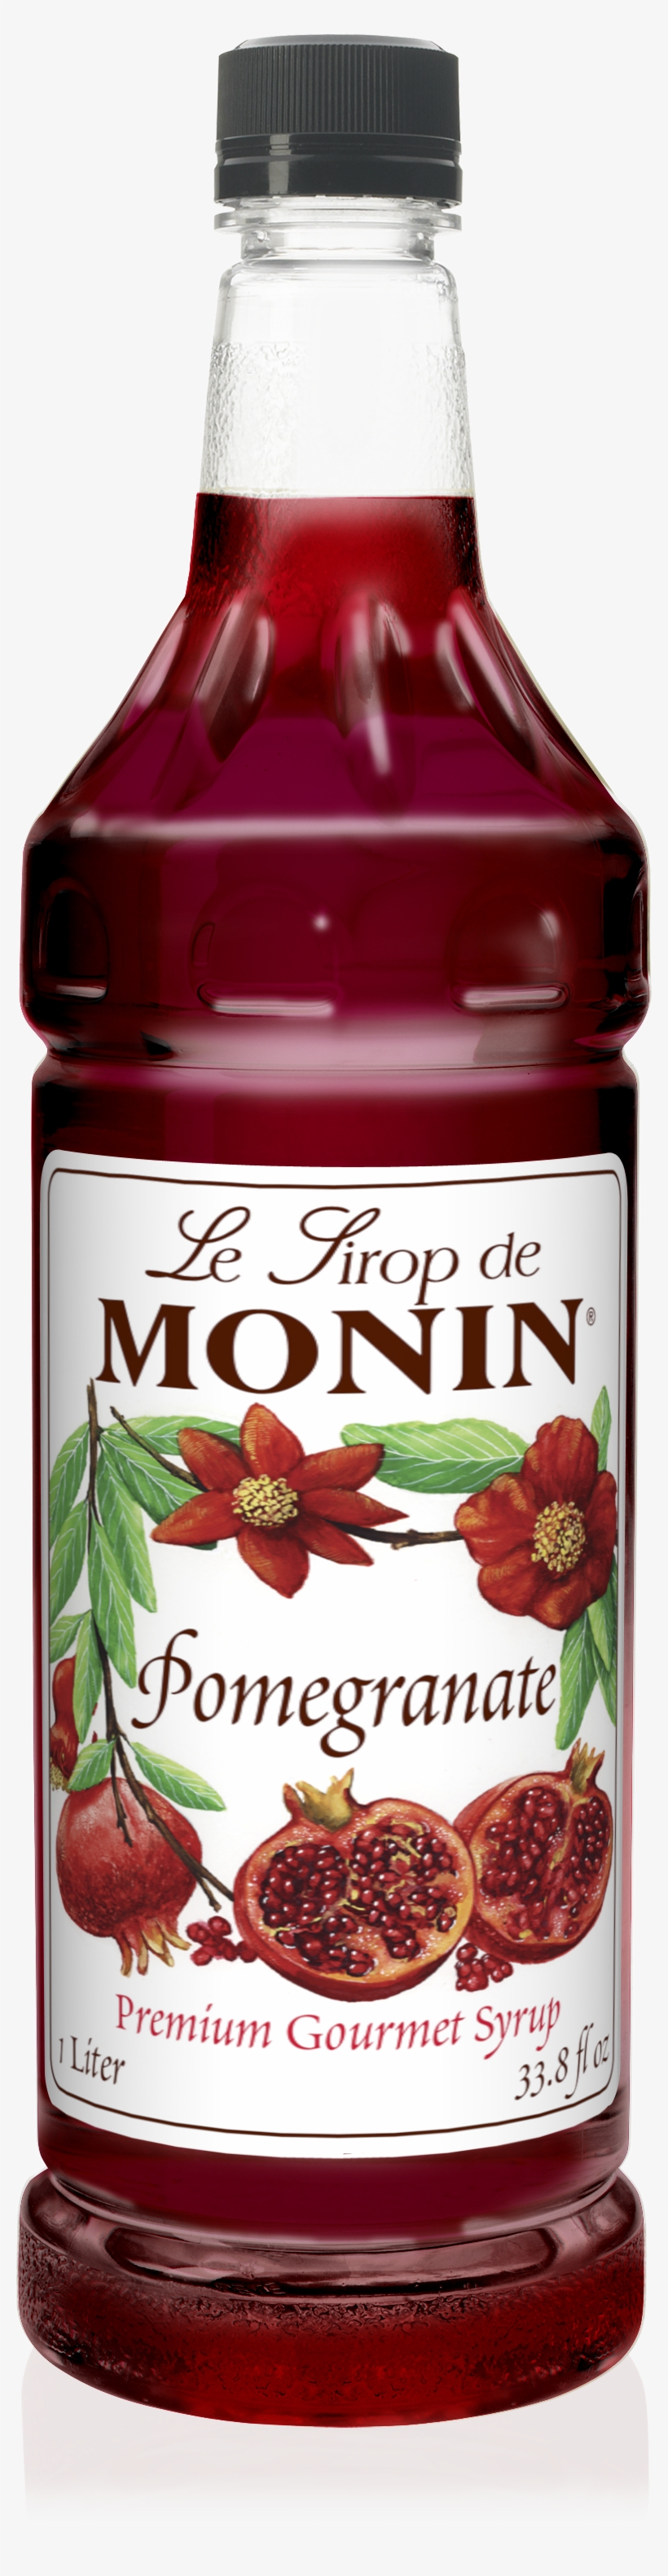 750 Ml Pomegranate Syrup - Monin Berry Sangria Syrup, transparent png #1811855